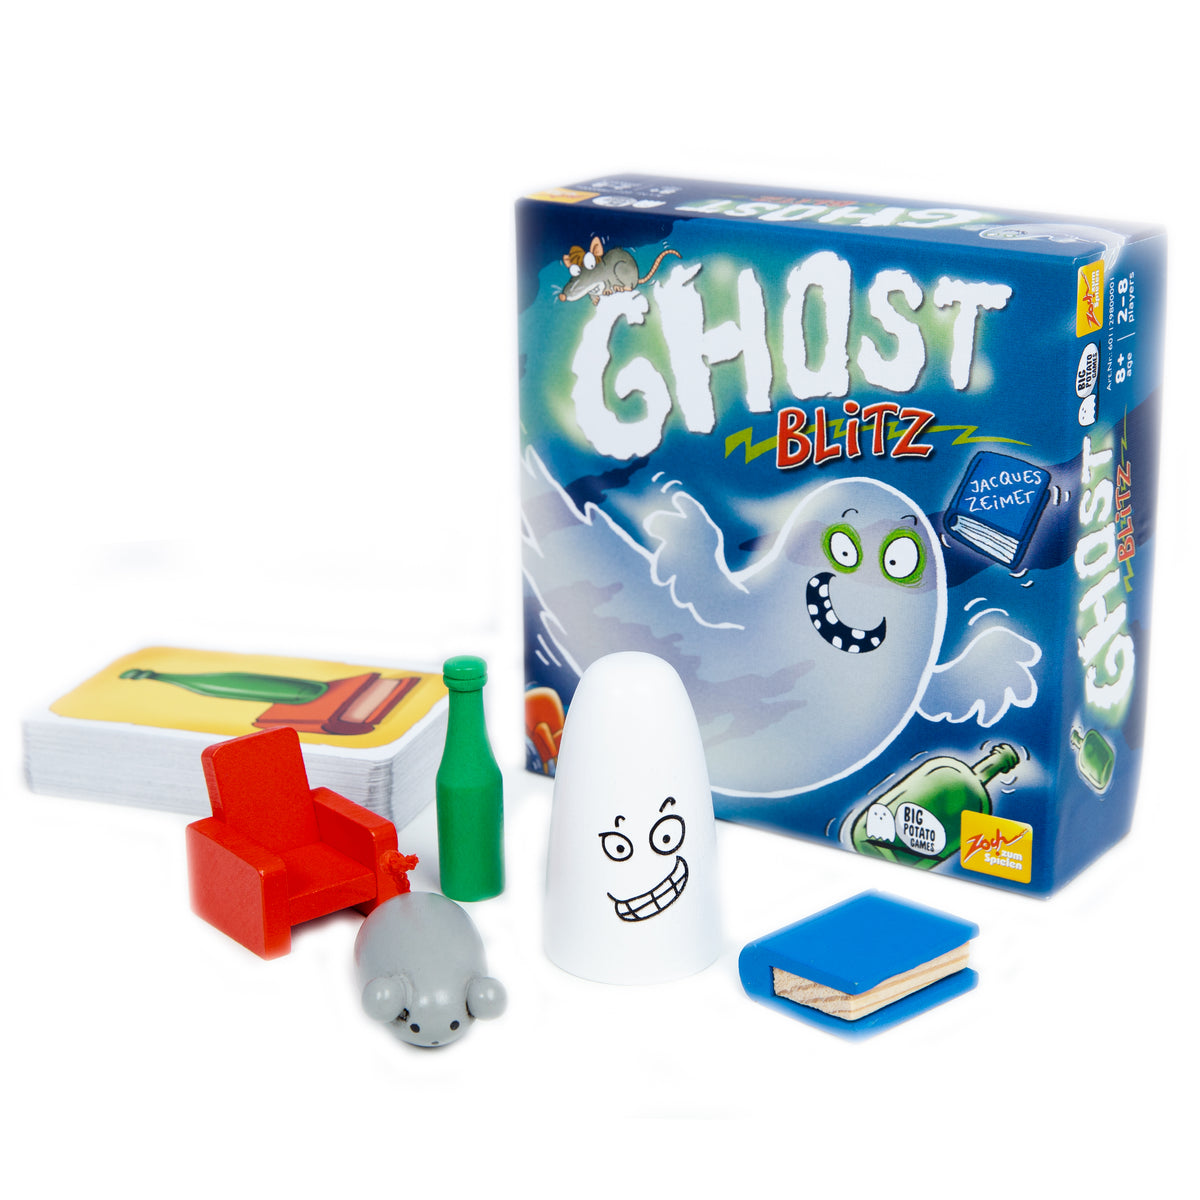 Ghost Blitz and contents